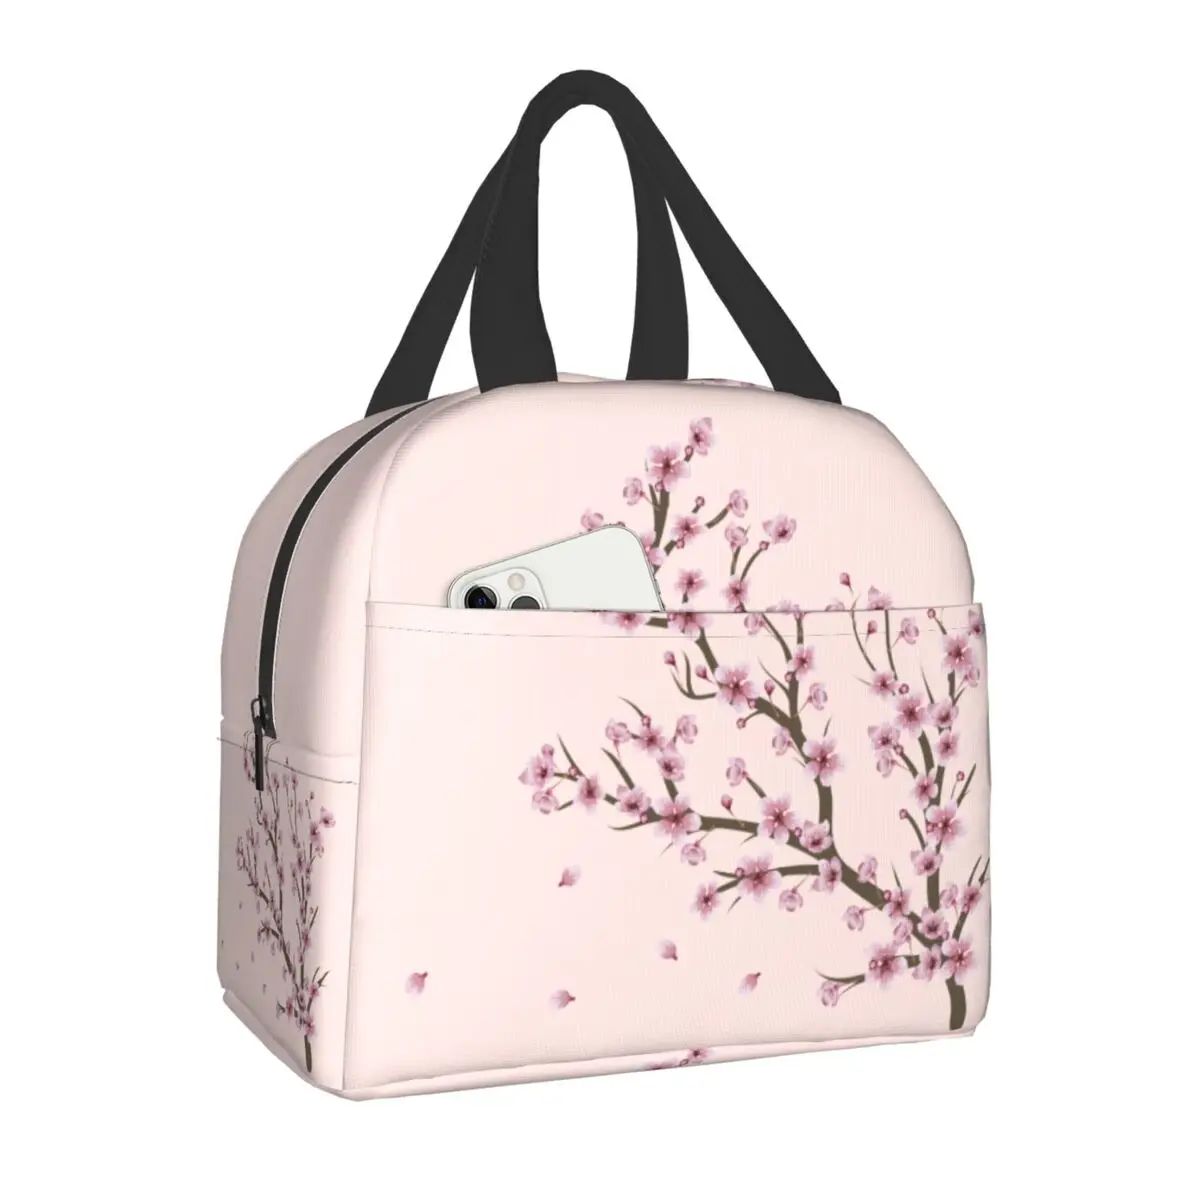 

Japanese Floral Blooming Sakura Branch Lunch Bag Portable Thermal Cooler Insulated Lunch Box for Women Kids Student School Food